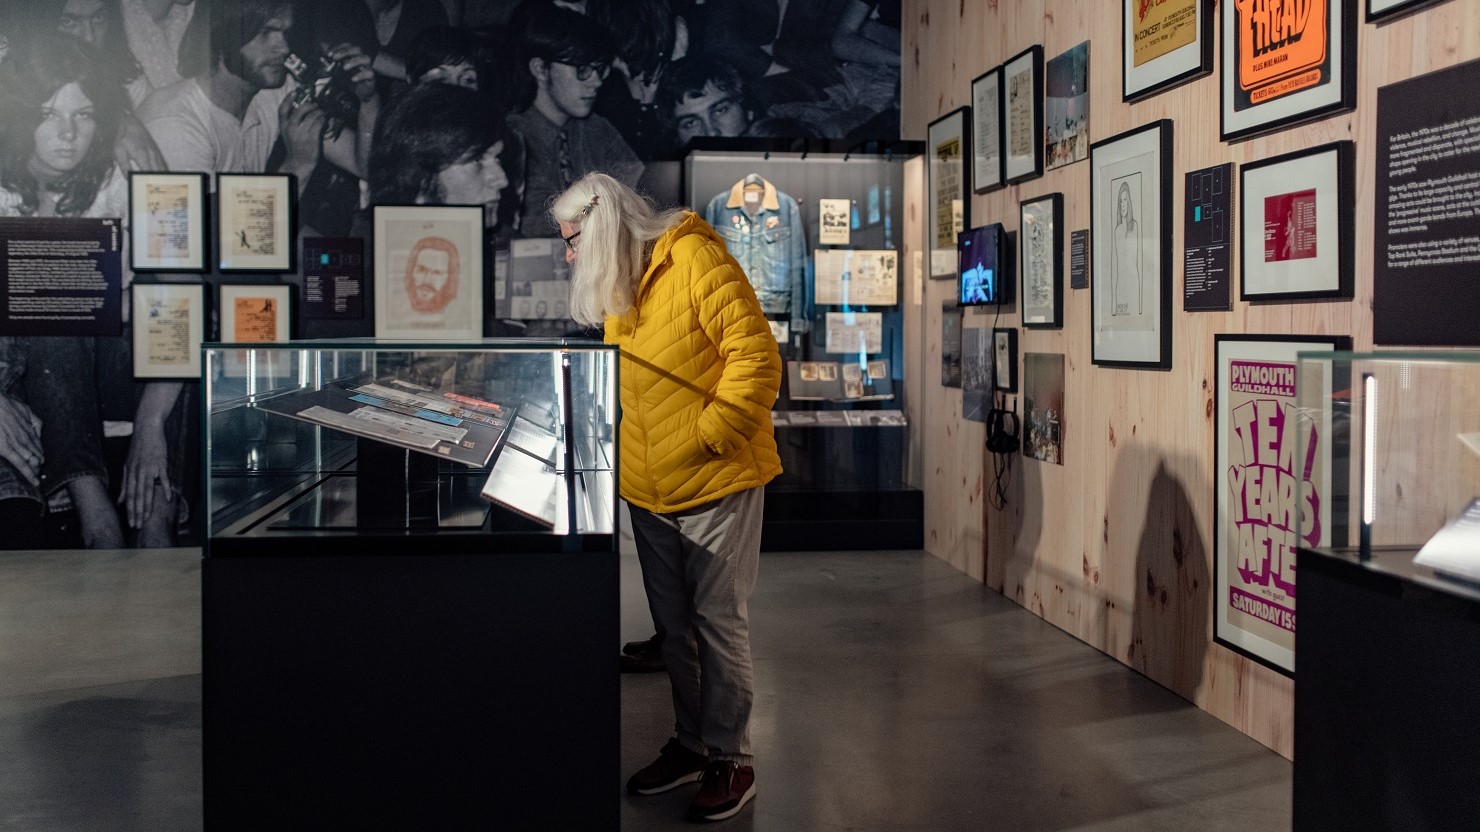 A visitor looking at the 'because the night belongs to us' exhibition